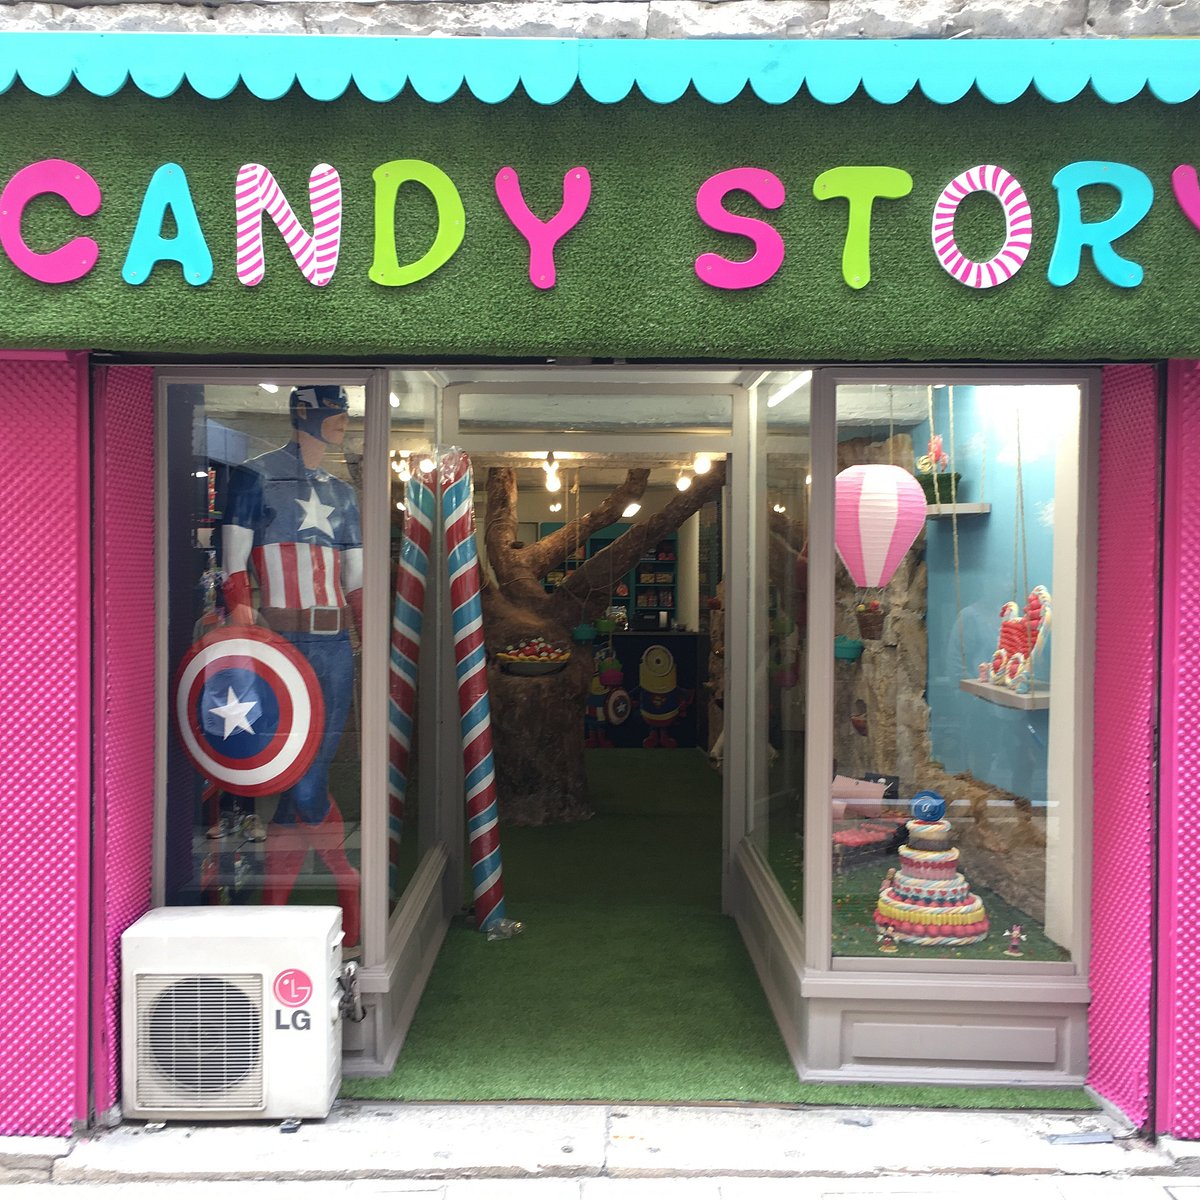 Candy story